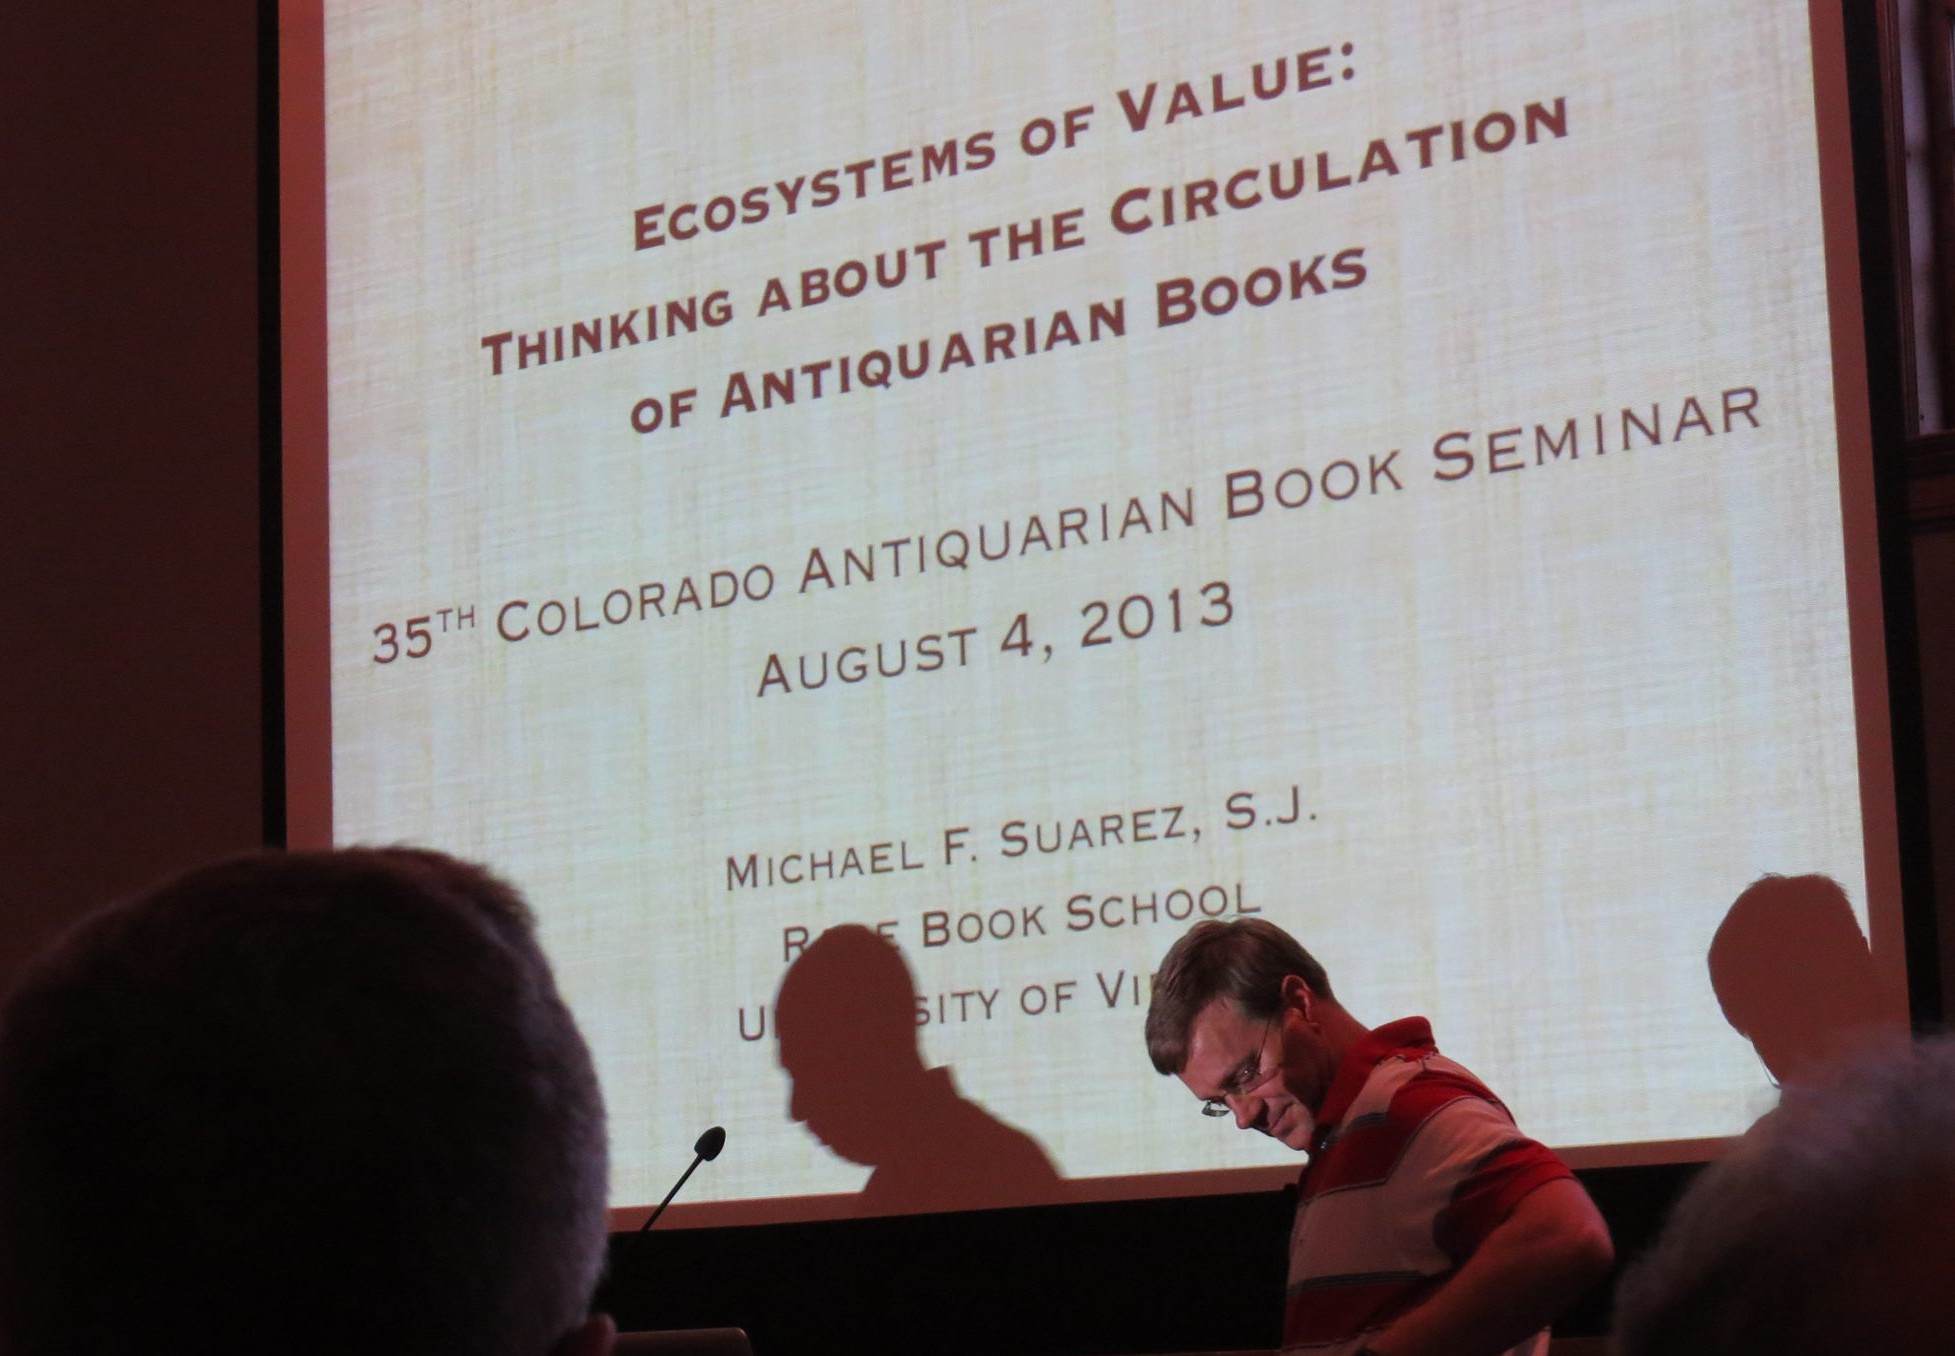 A talk by Michael Suarez, titled "Ecosystems of Value: Thinking about the Circulation of Antiquarian Books"